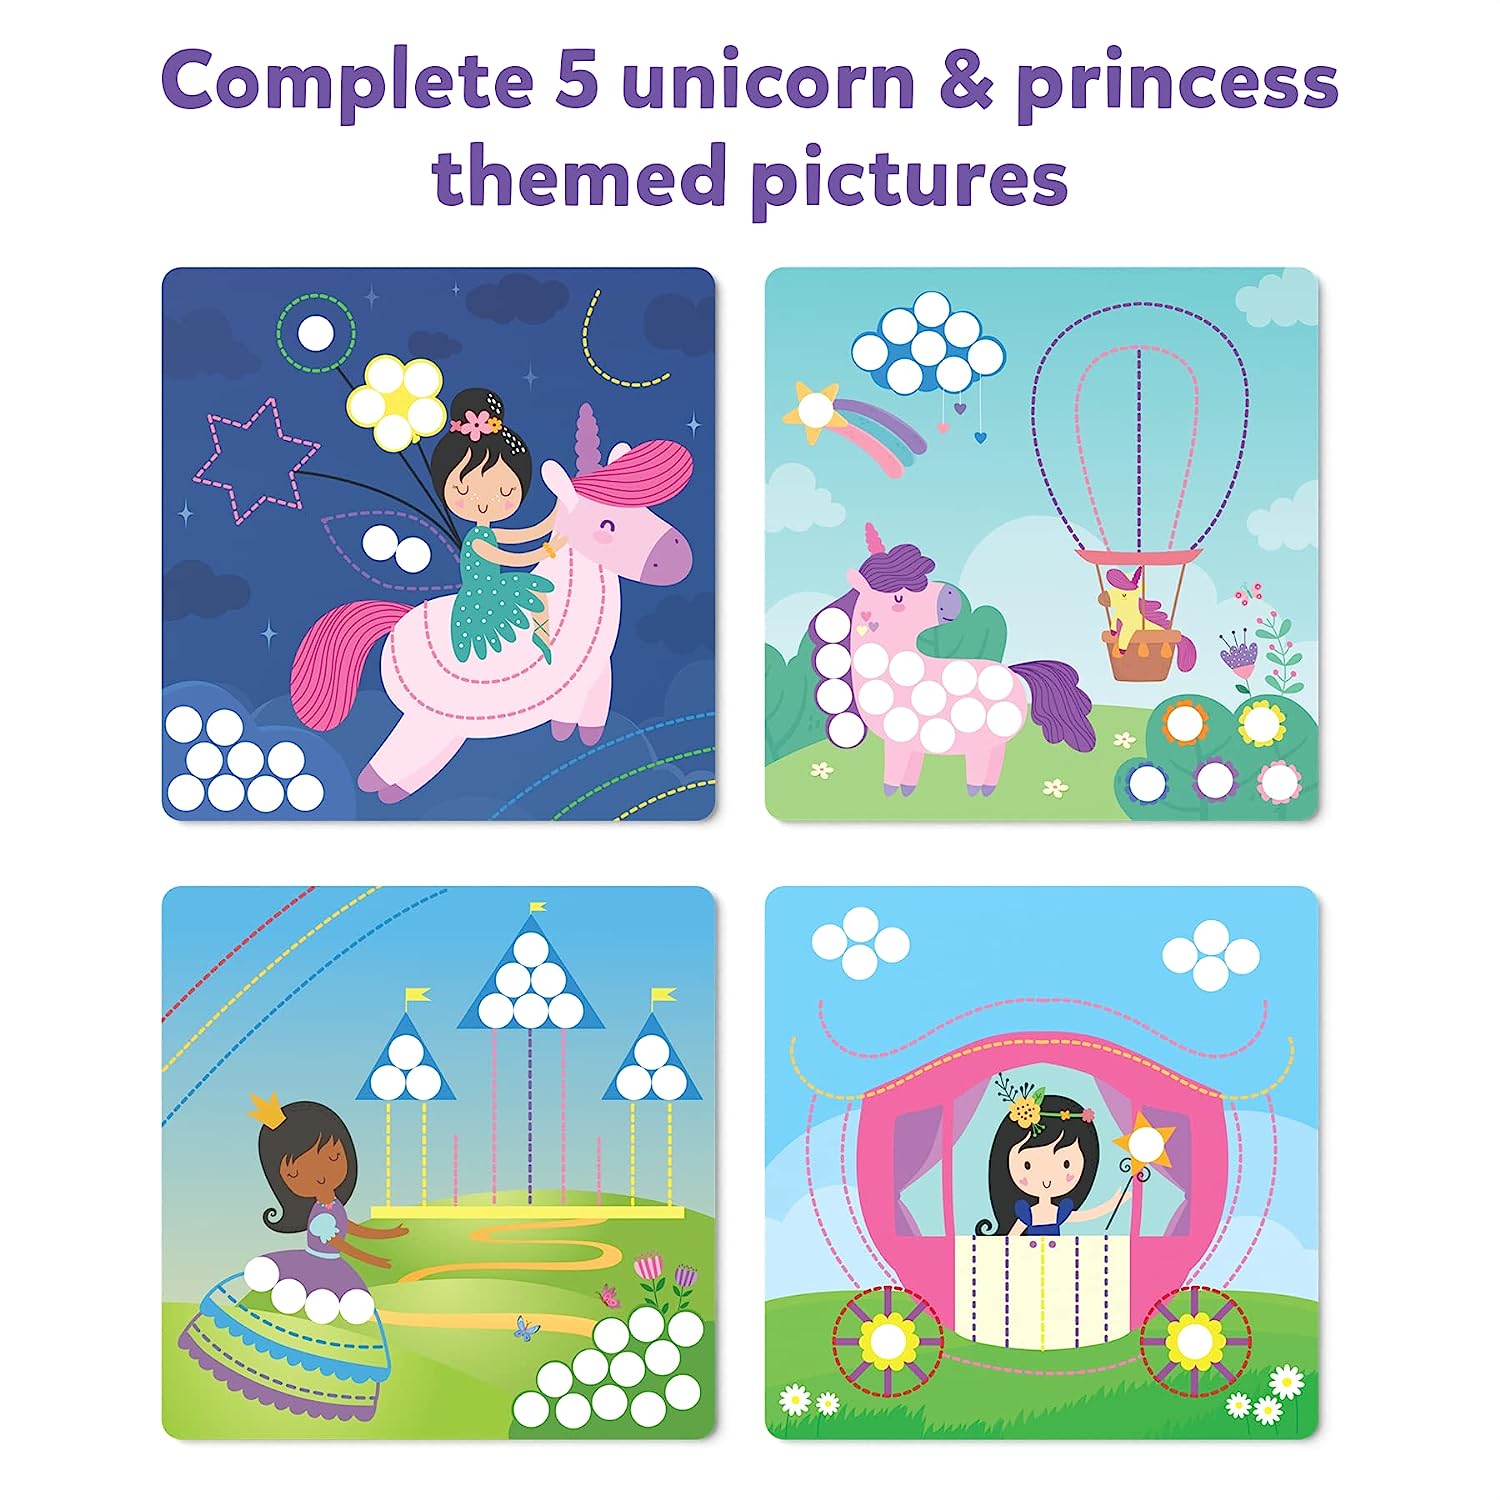 Skillmatics Dot It with Magnets - Unicorns & Princesses DIY Art Activity Gift Kit for Ages 3-7 Years